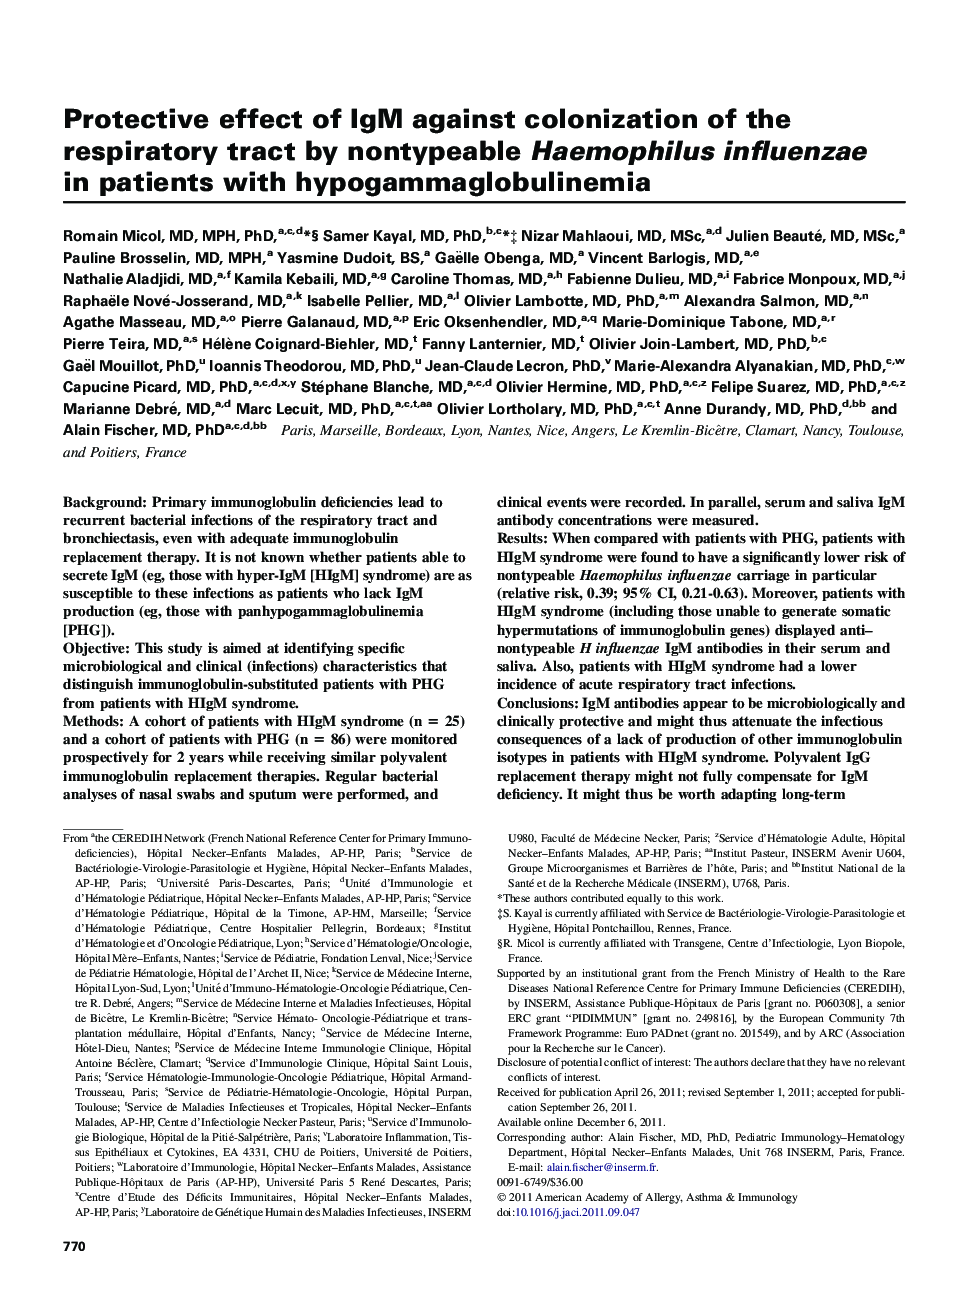 Protective effect of IgM against colonization of the respiratory tract by nontypeable Haemophilus influenzae in patients with hypogammaglobulinemia